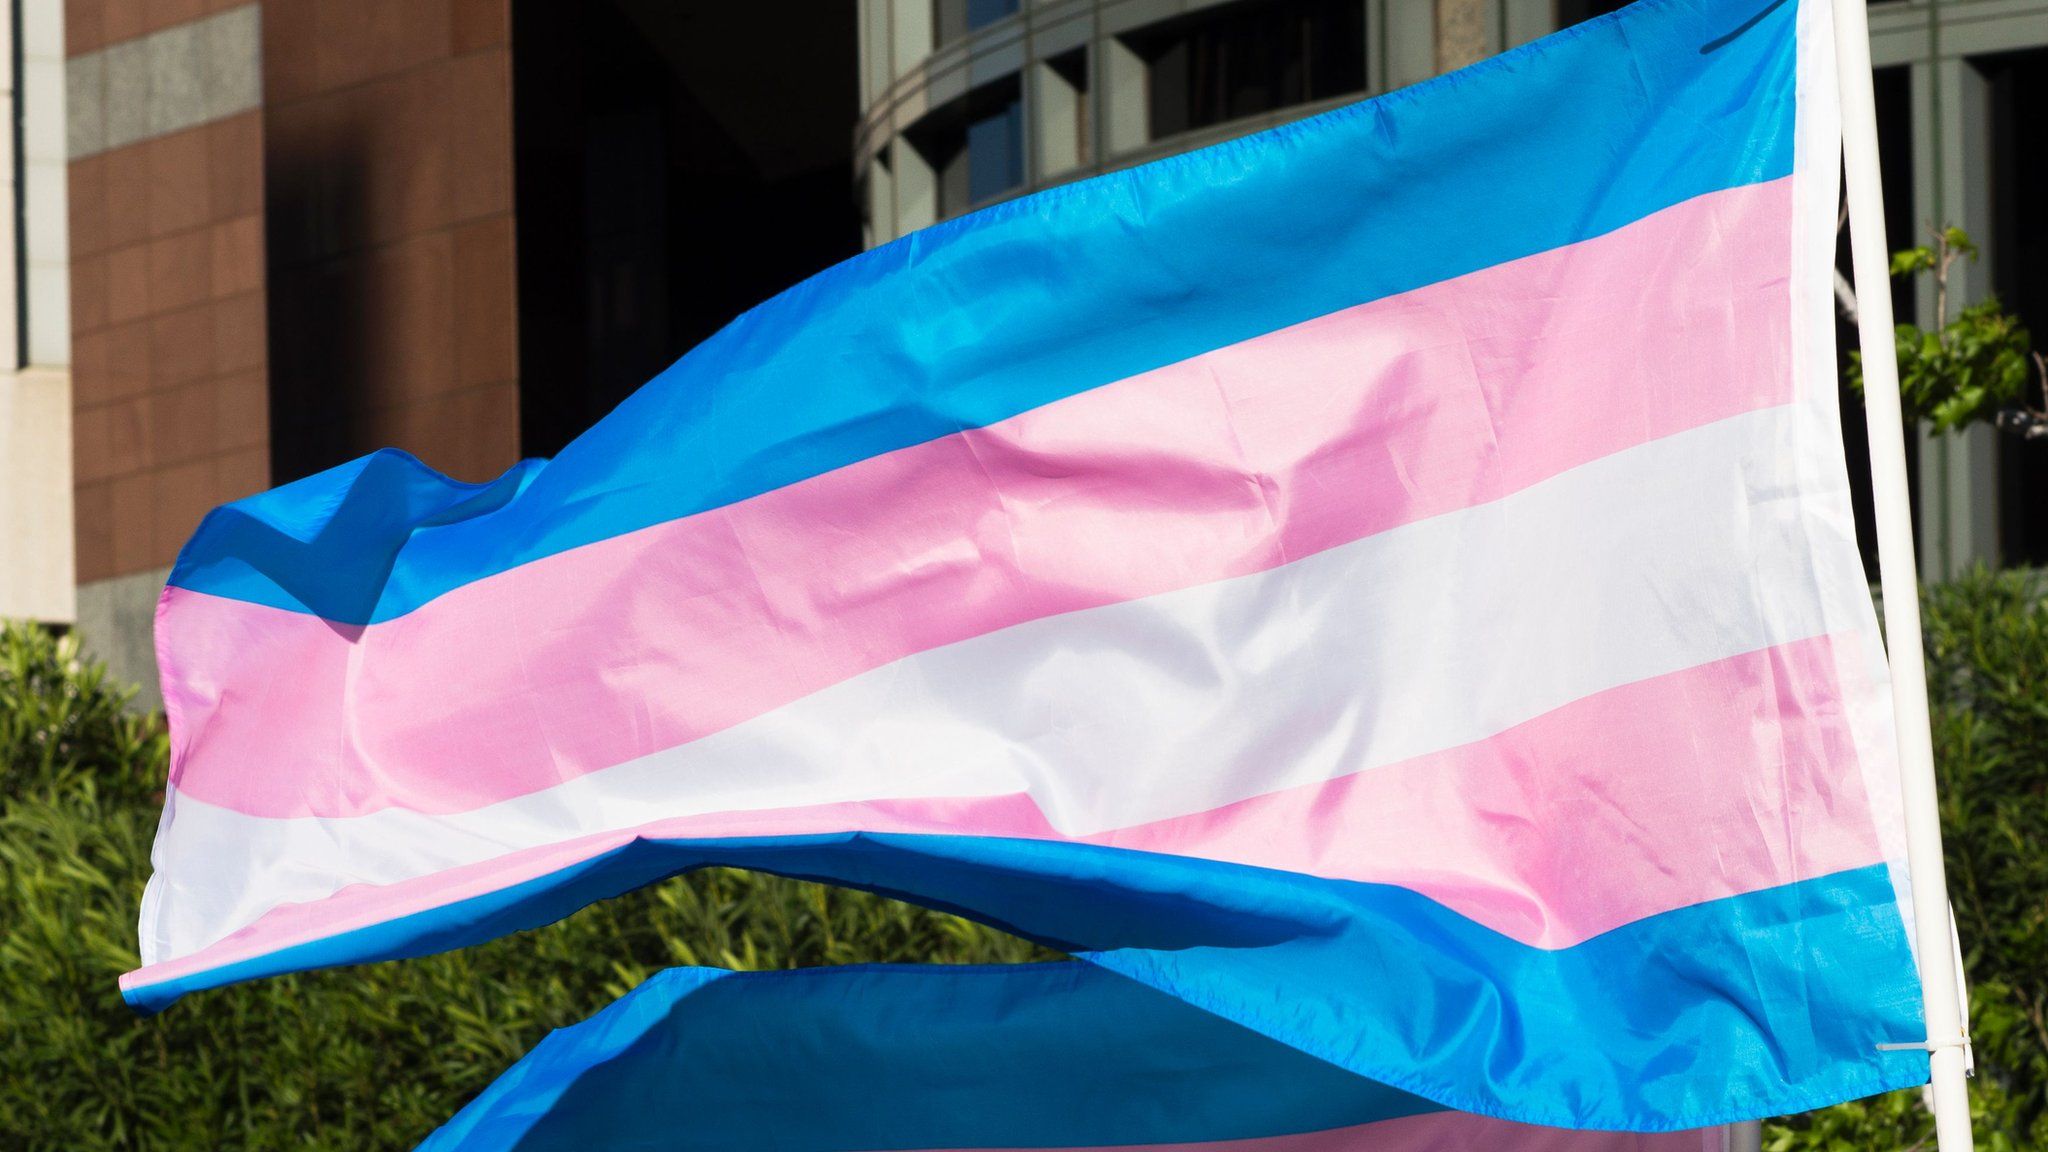 File photo showing trans pride flag at the Edward R. Roybal Federal Building in Los Angeles, California (31 March 2017)